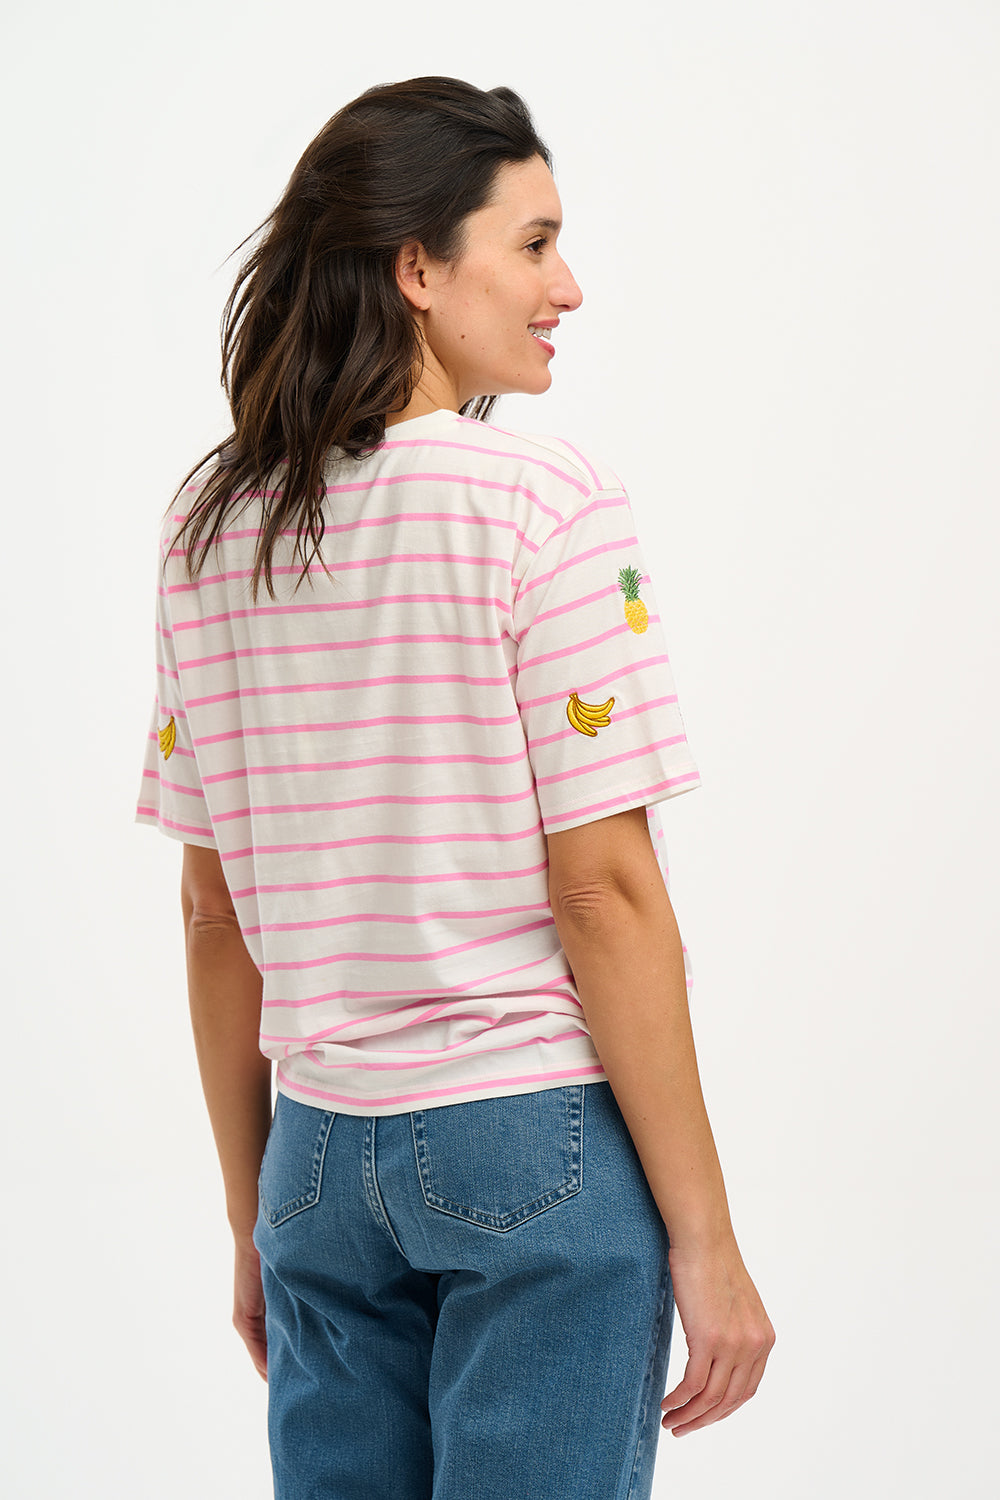 Camiseta Sugarhill Kinsley Relaxed Off-White Pink Fruit Embroidery